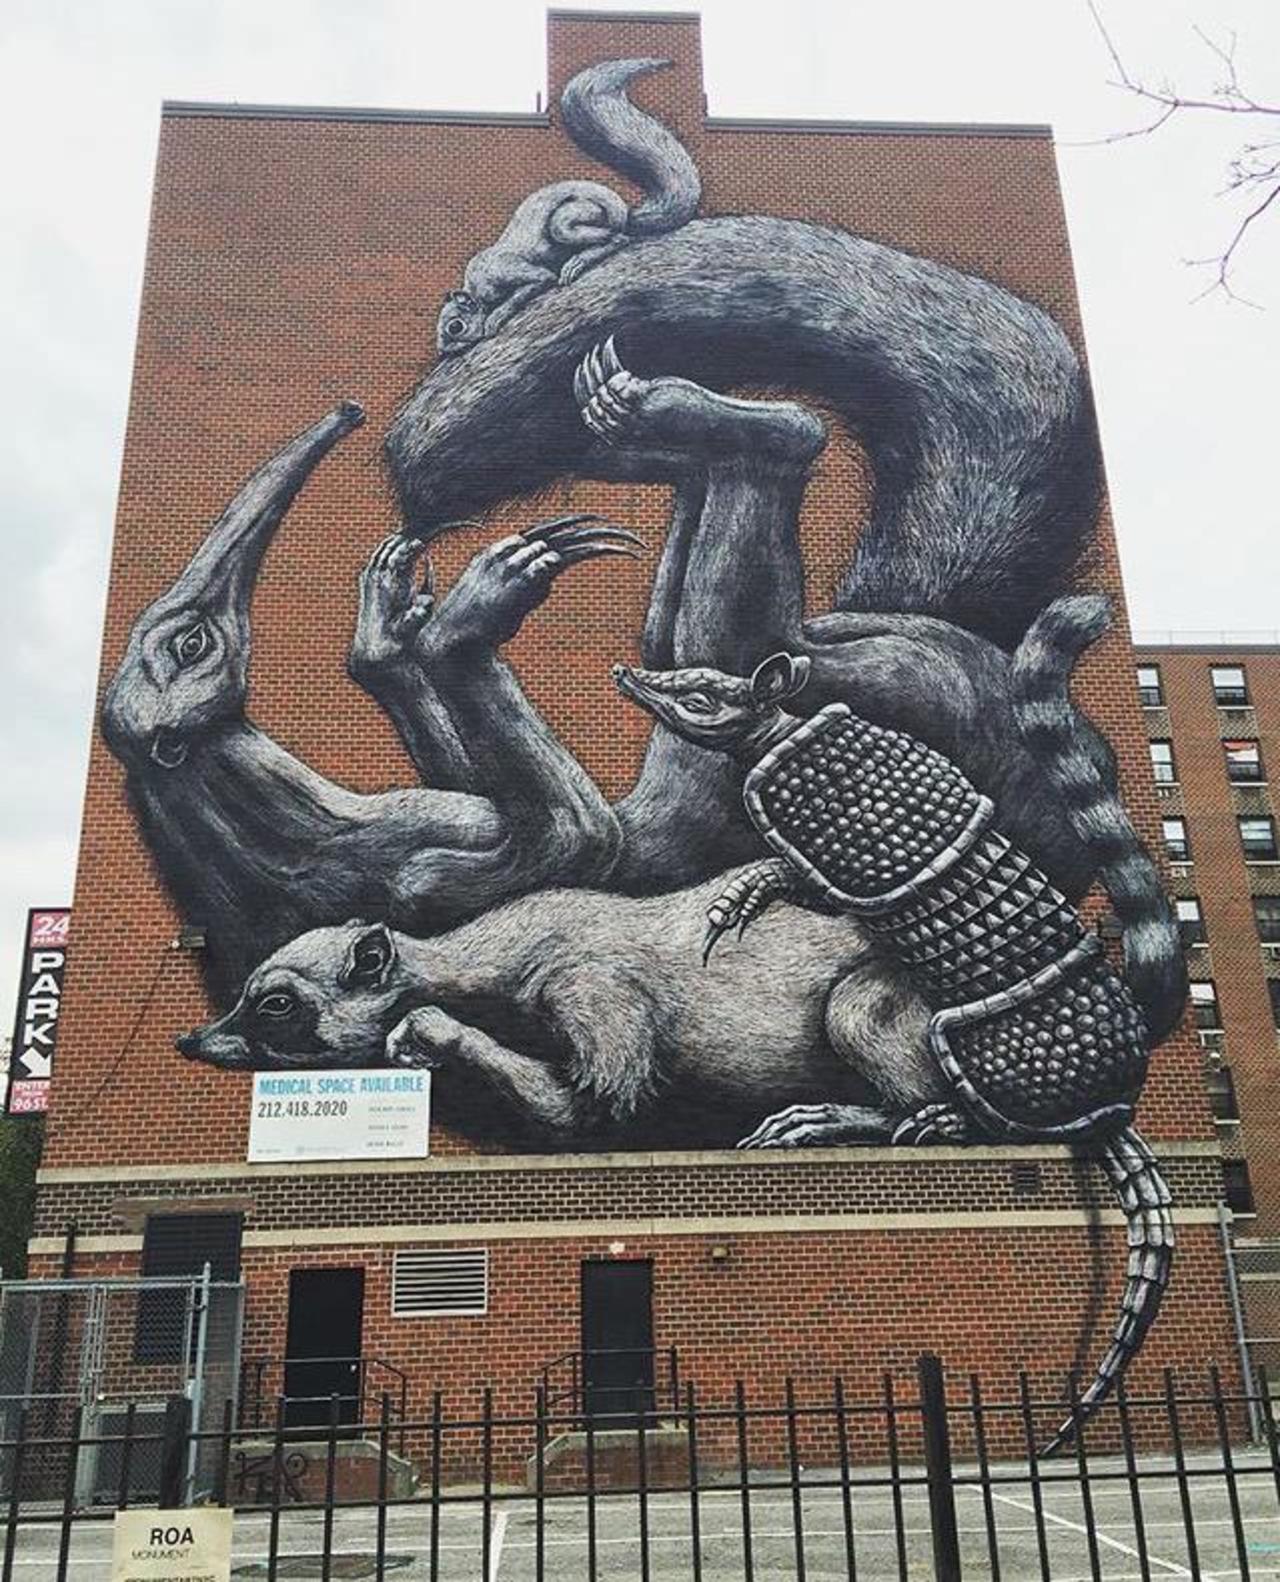 The completed new large scale Street Art wall by ROA in NYC

#art #graffiti #mural #streetart http://t.co/NX4XbZJEdh